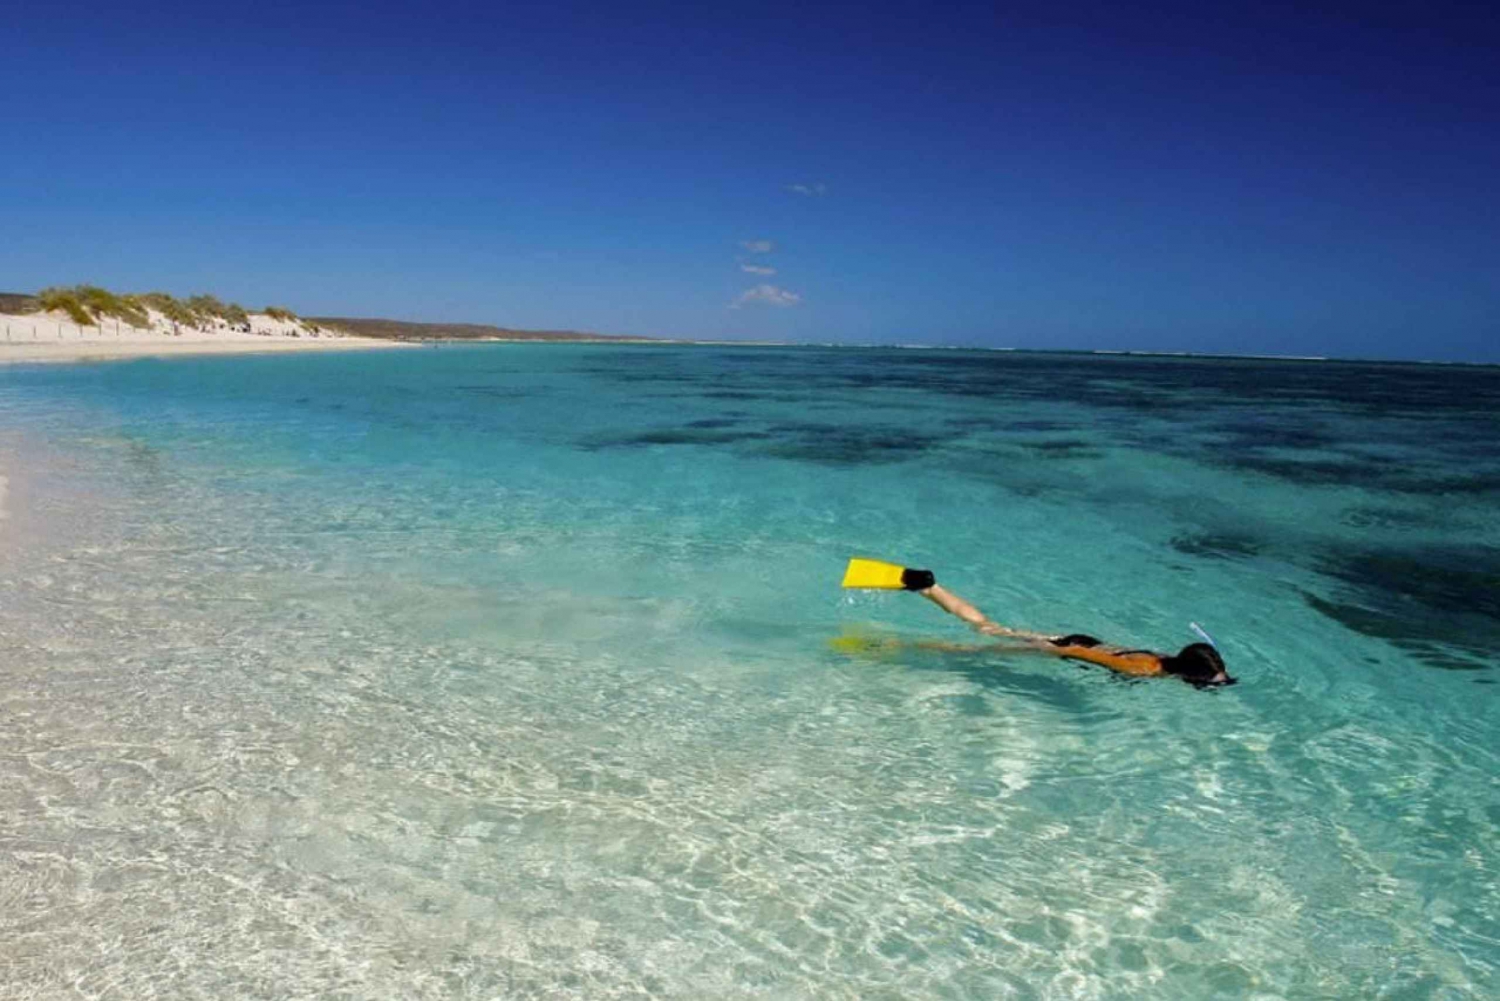 From Perth: 6-Day Whale Shark Snorkel and Ningaloo Reef Tour